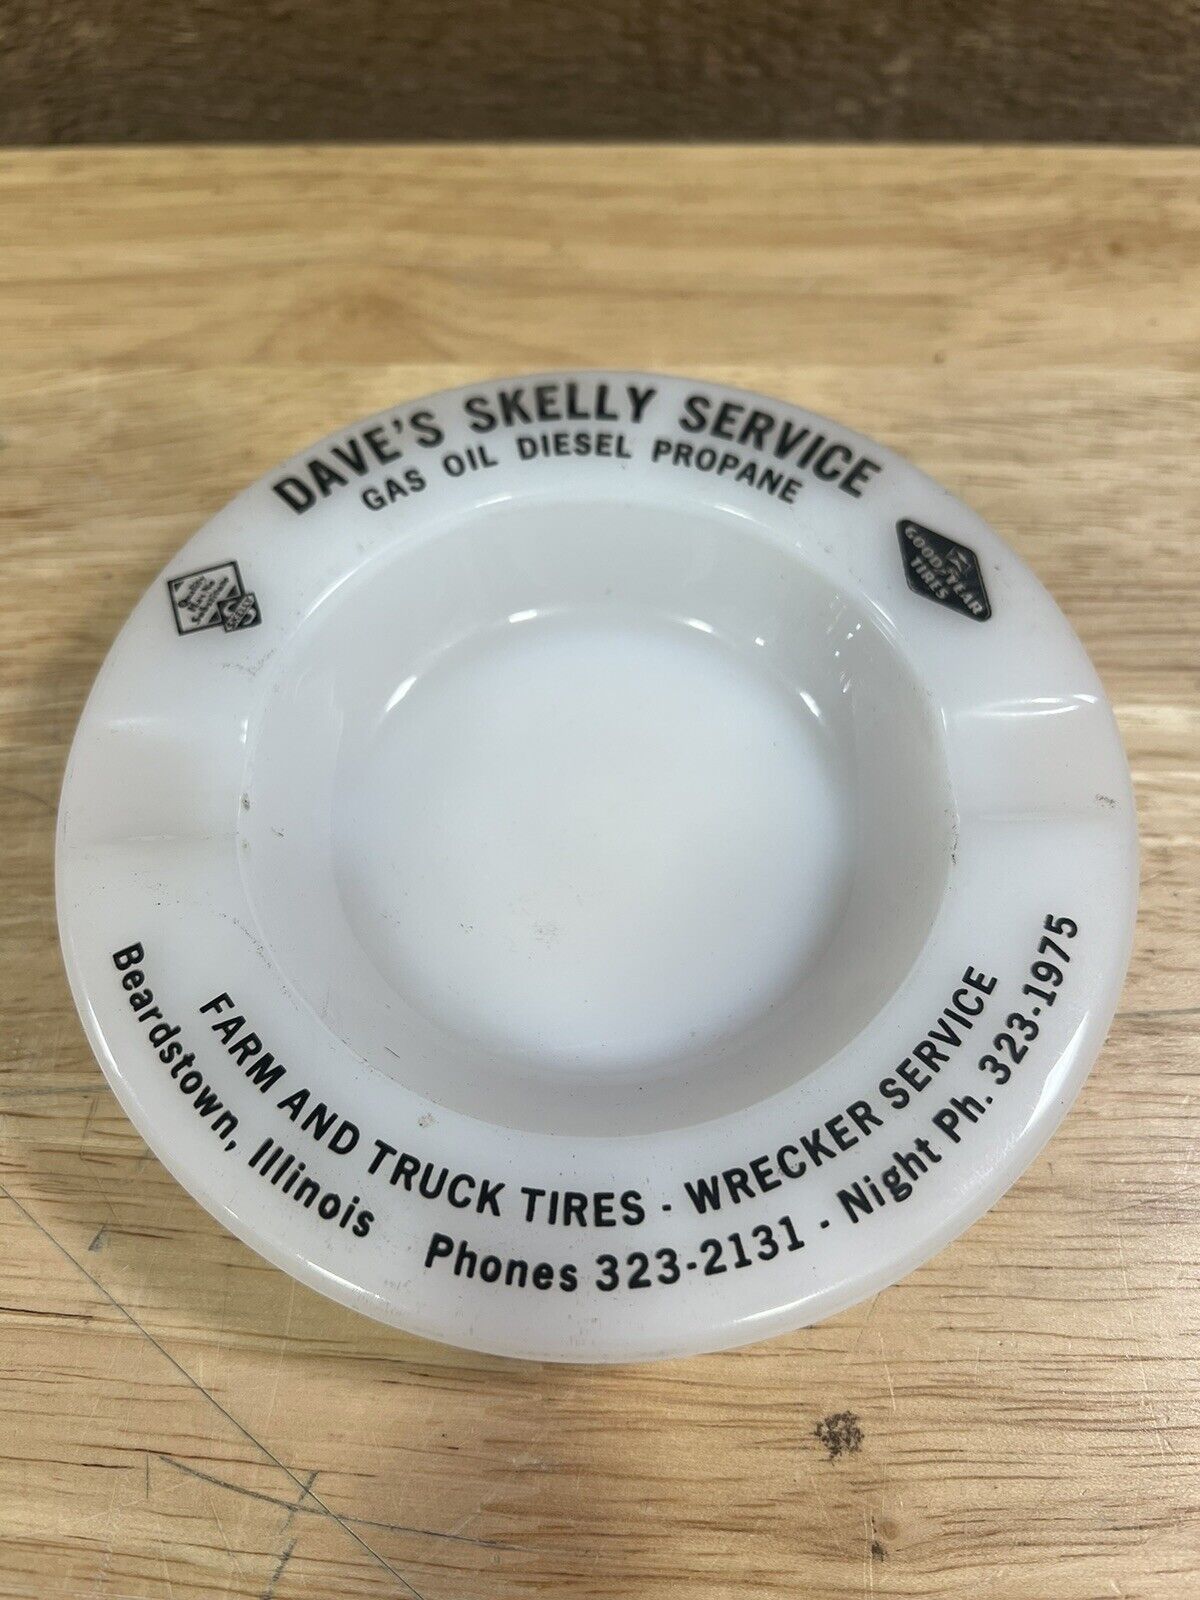 Vintage Dave’s Skelly Service Gas Oil Diesel Propane Goodyear Tires Ashtray